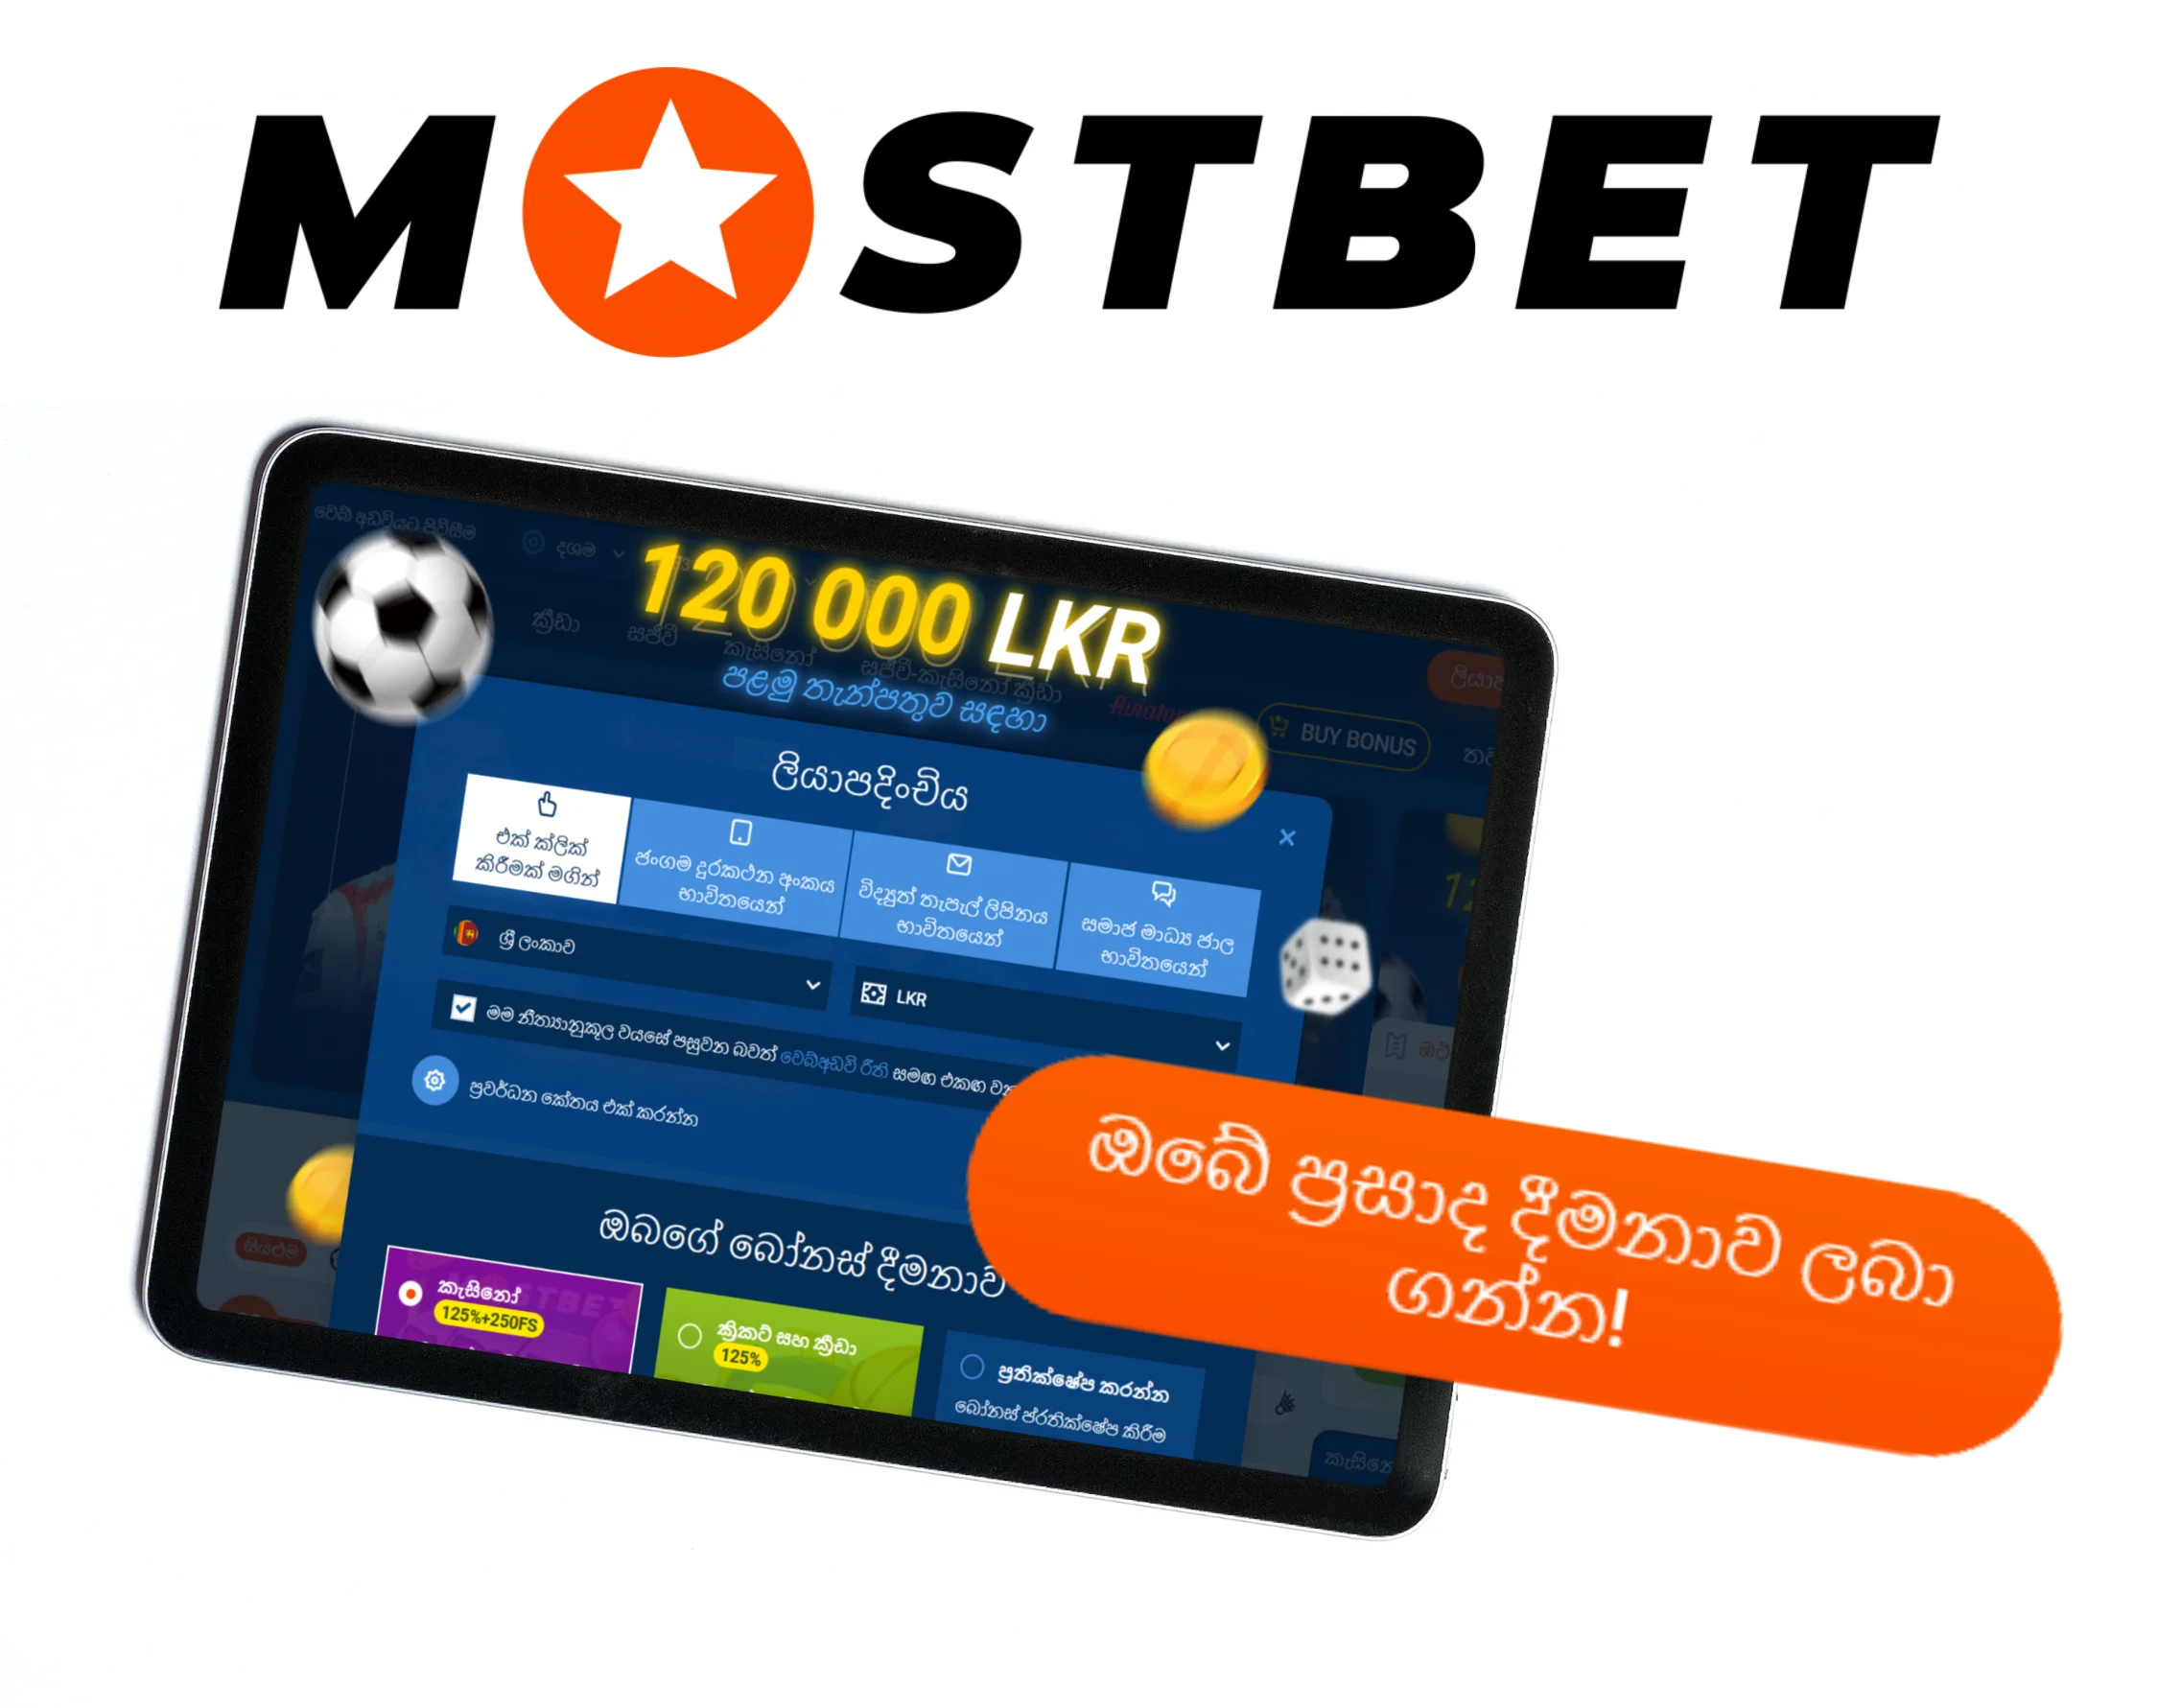 Mostbet Betting and Casino in Turkey? It's Easy If You Do It Smart